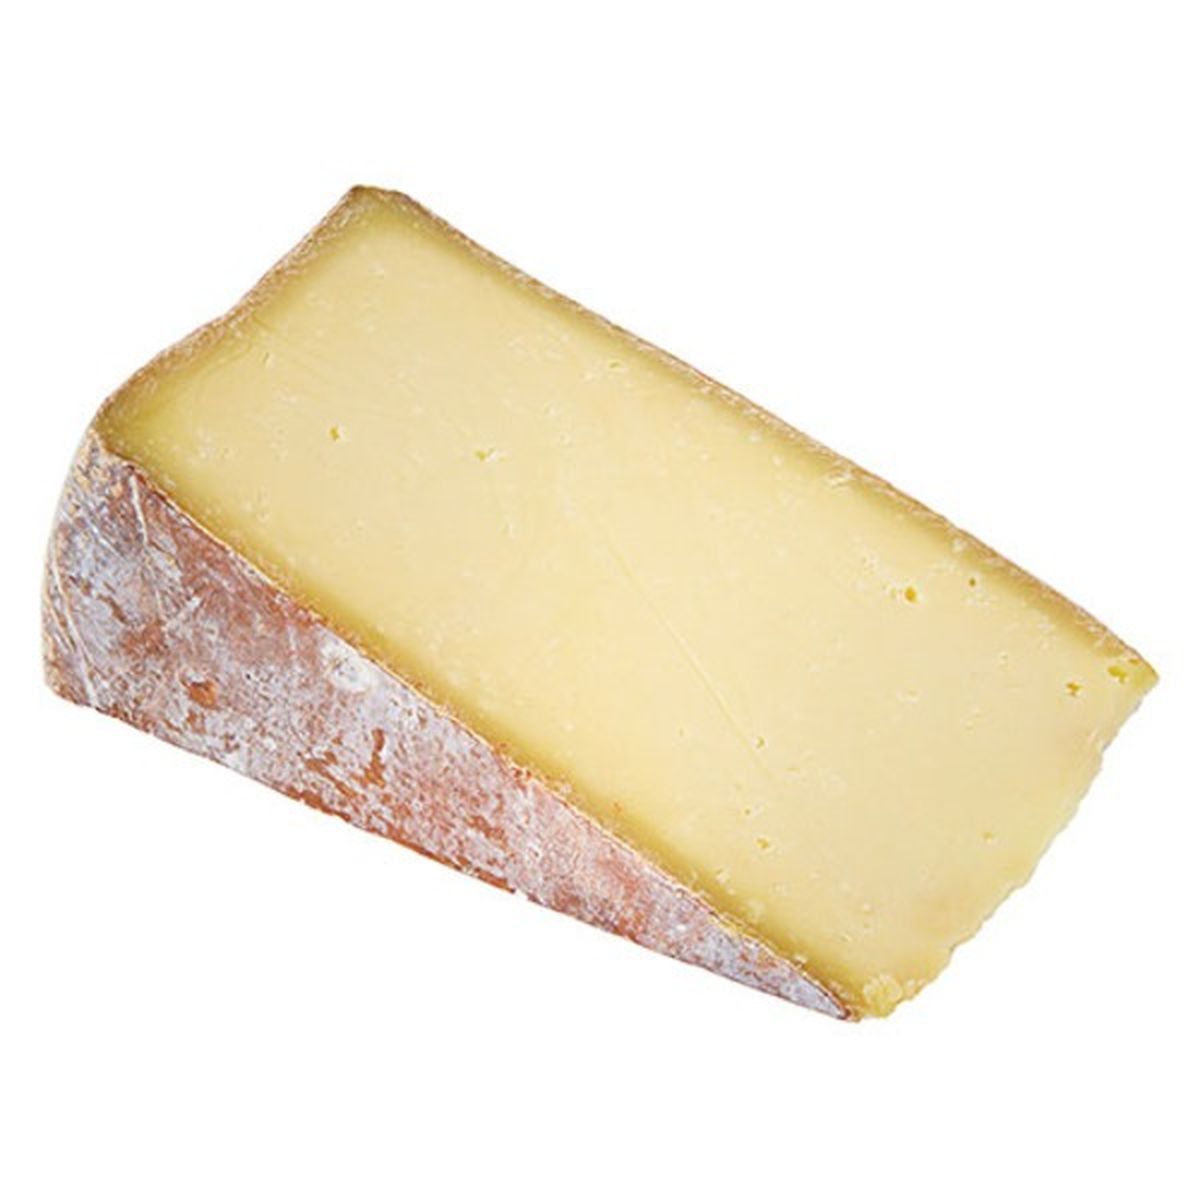 Calories in Meadow Creek Dairy Mountaineer Alpine Style Cheese